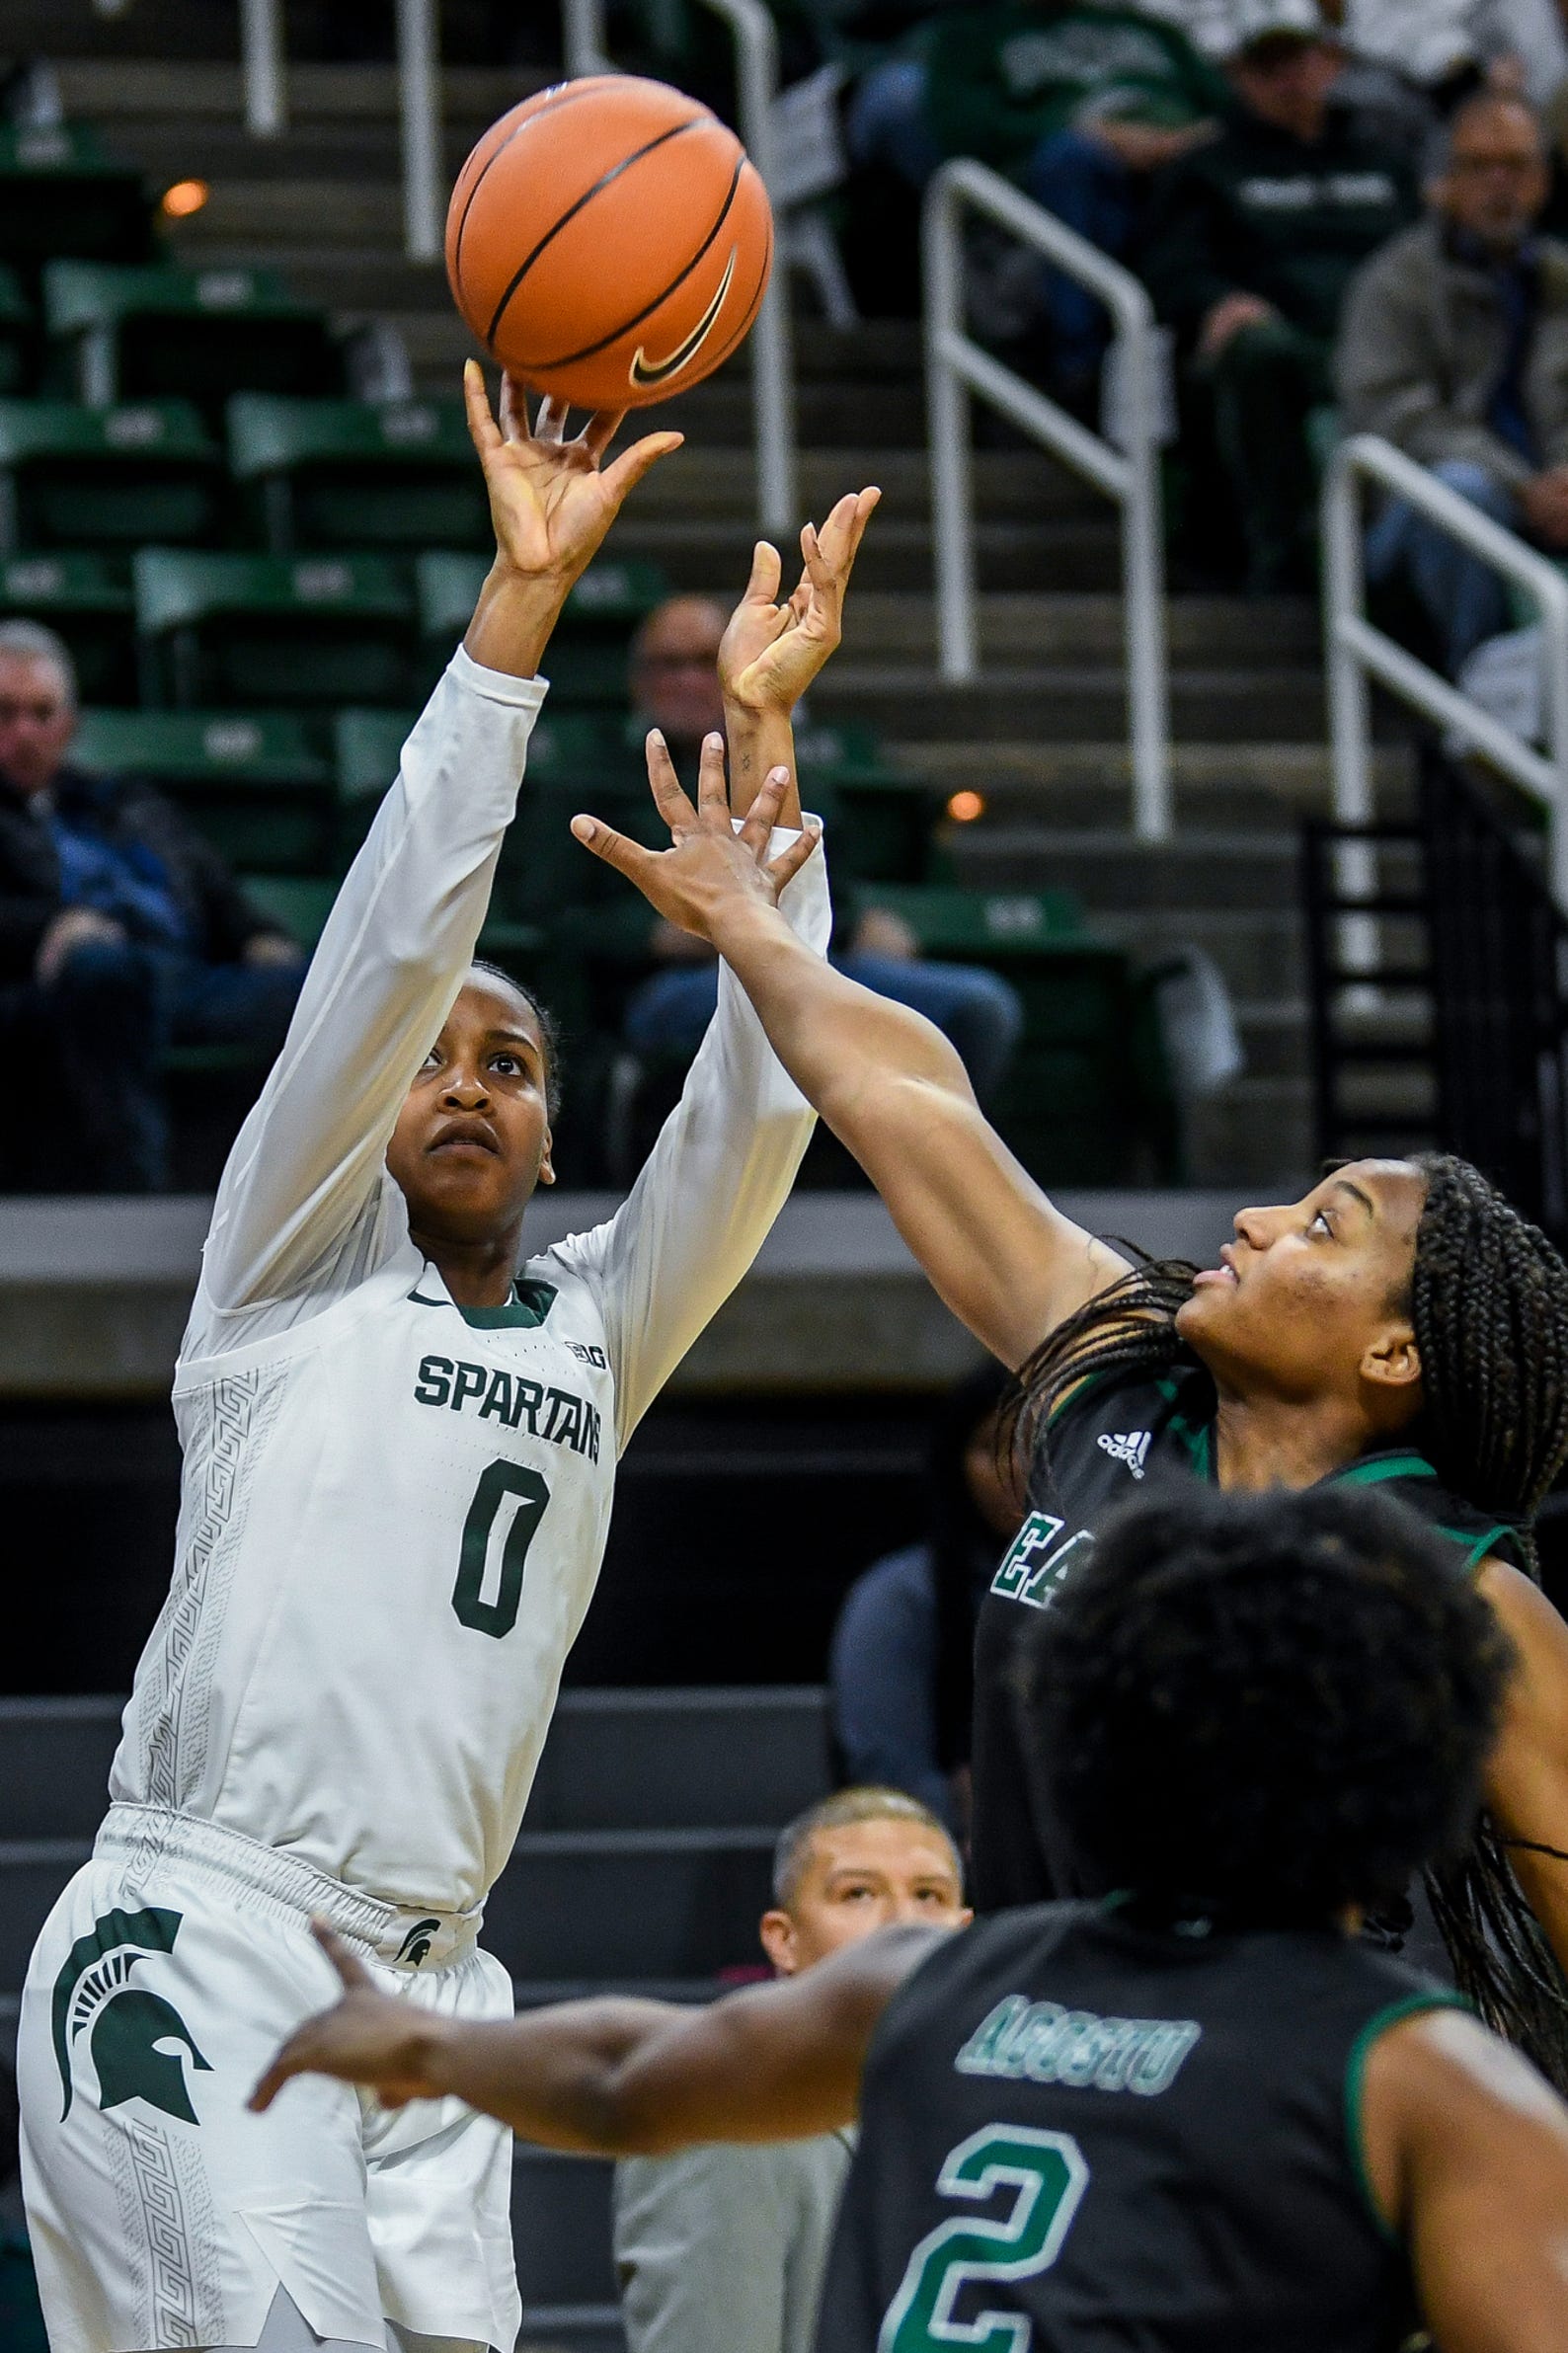 Michigan State's Shay Colley, left, shoots as Eastern Michigan's Courtnie Lewis defends during the first quarter on Tuesday, Nov. 5, 2019, at the Breslin Center in East Lansing.